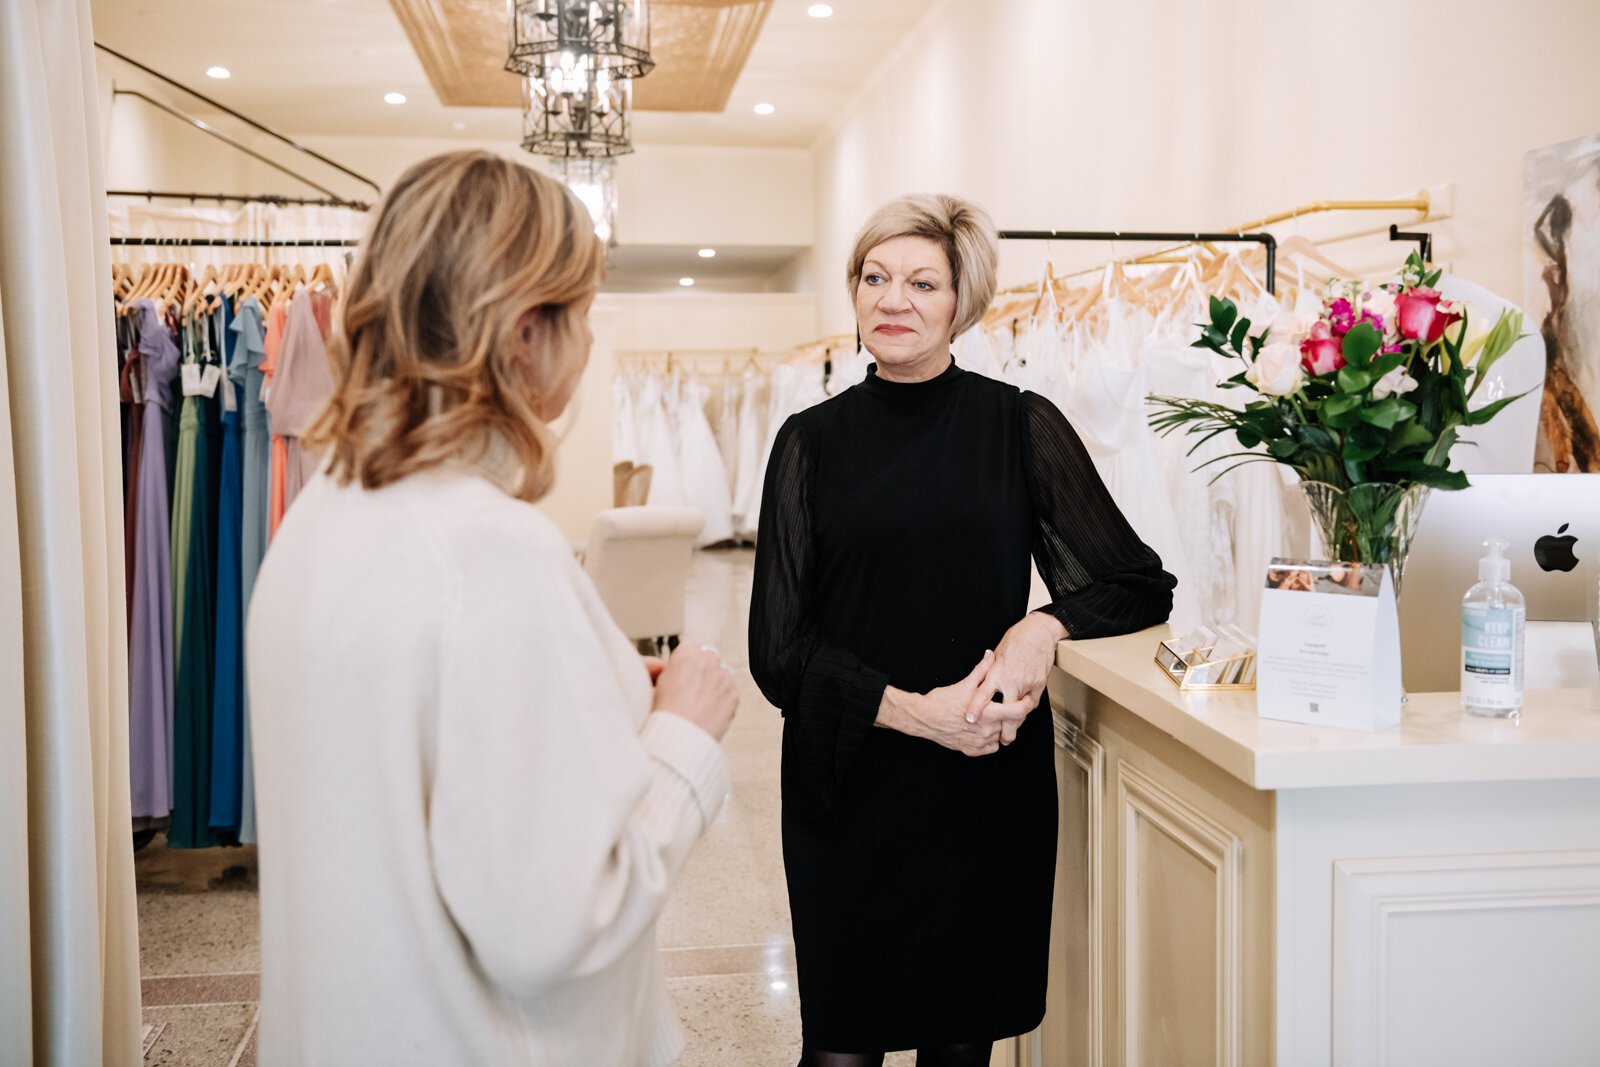 Lisa Downs, owner of Ellen's Bridal & Dress Boutique, talks with a bride's mother during an appointment.